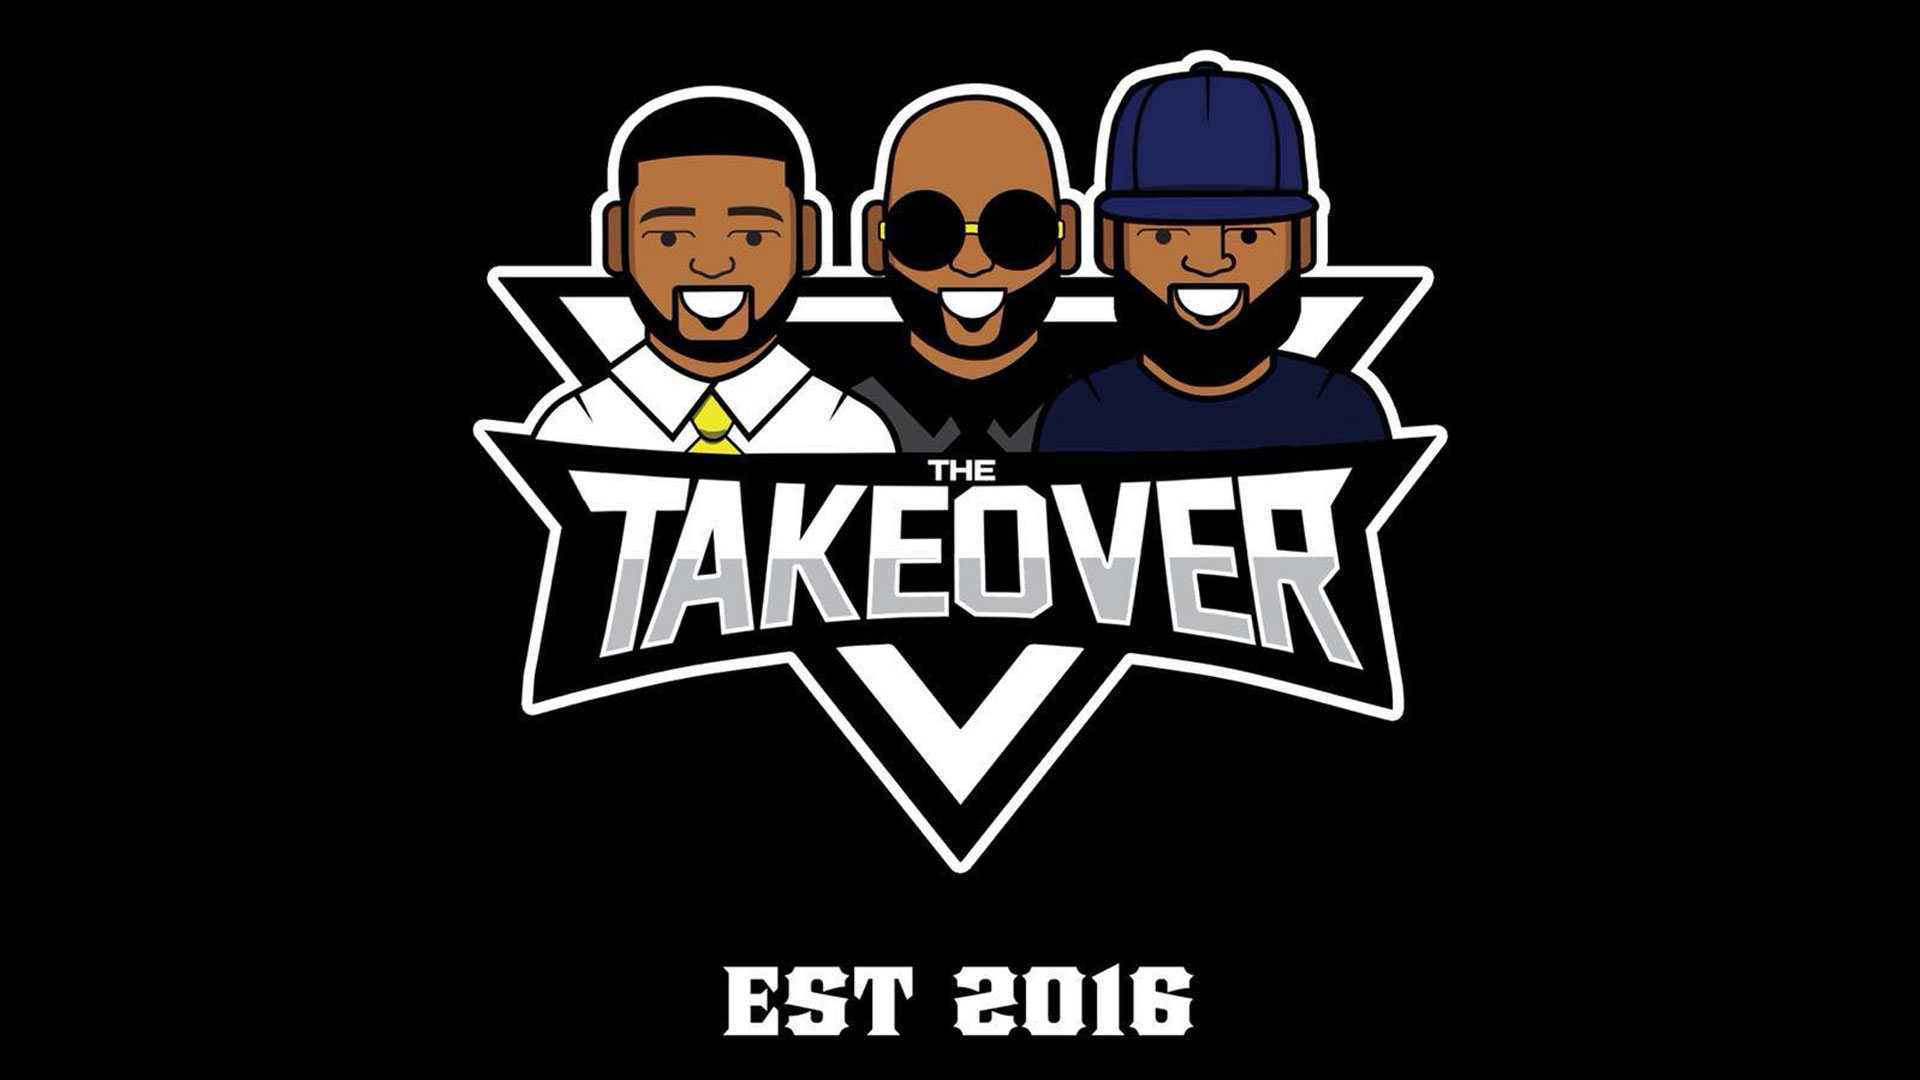 Takeover TV - Takeover TV focuses on highlighting local urban artist, actors, athletes and cultural figures. I sat down with them to discuss our short film, webseries, and future plans!